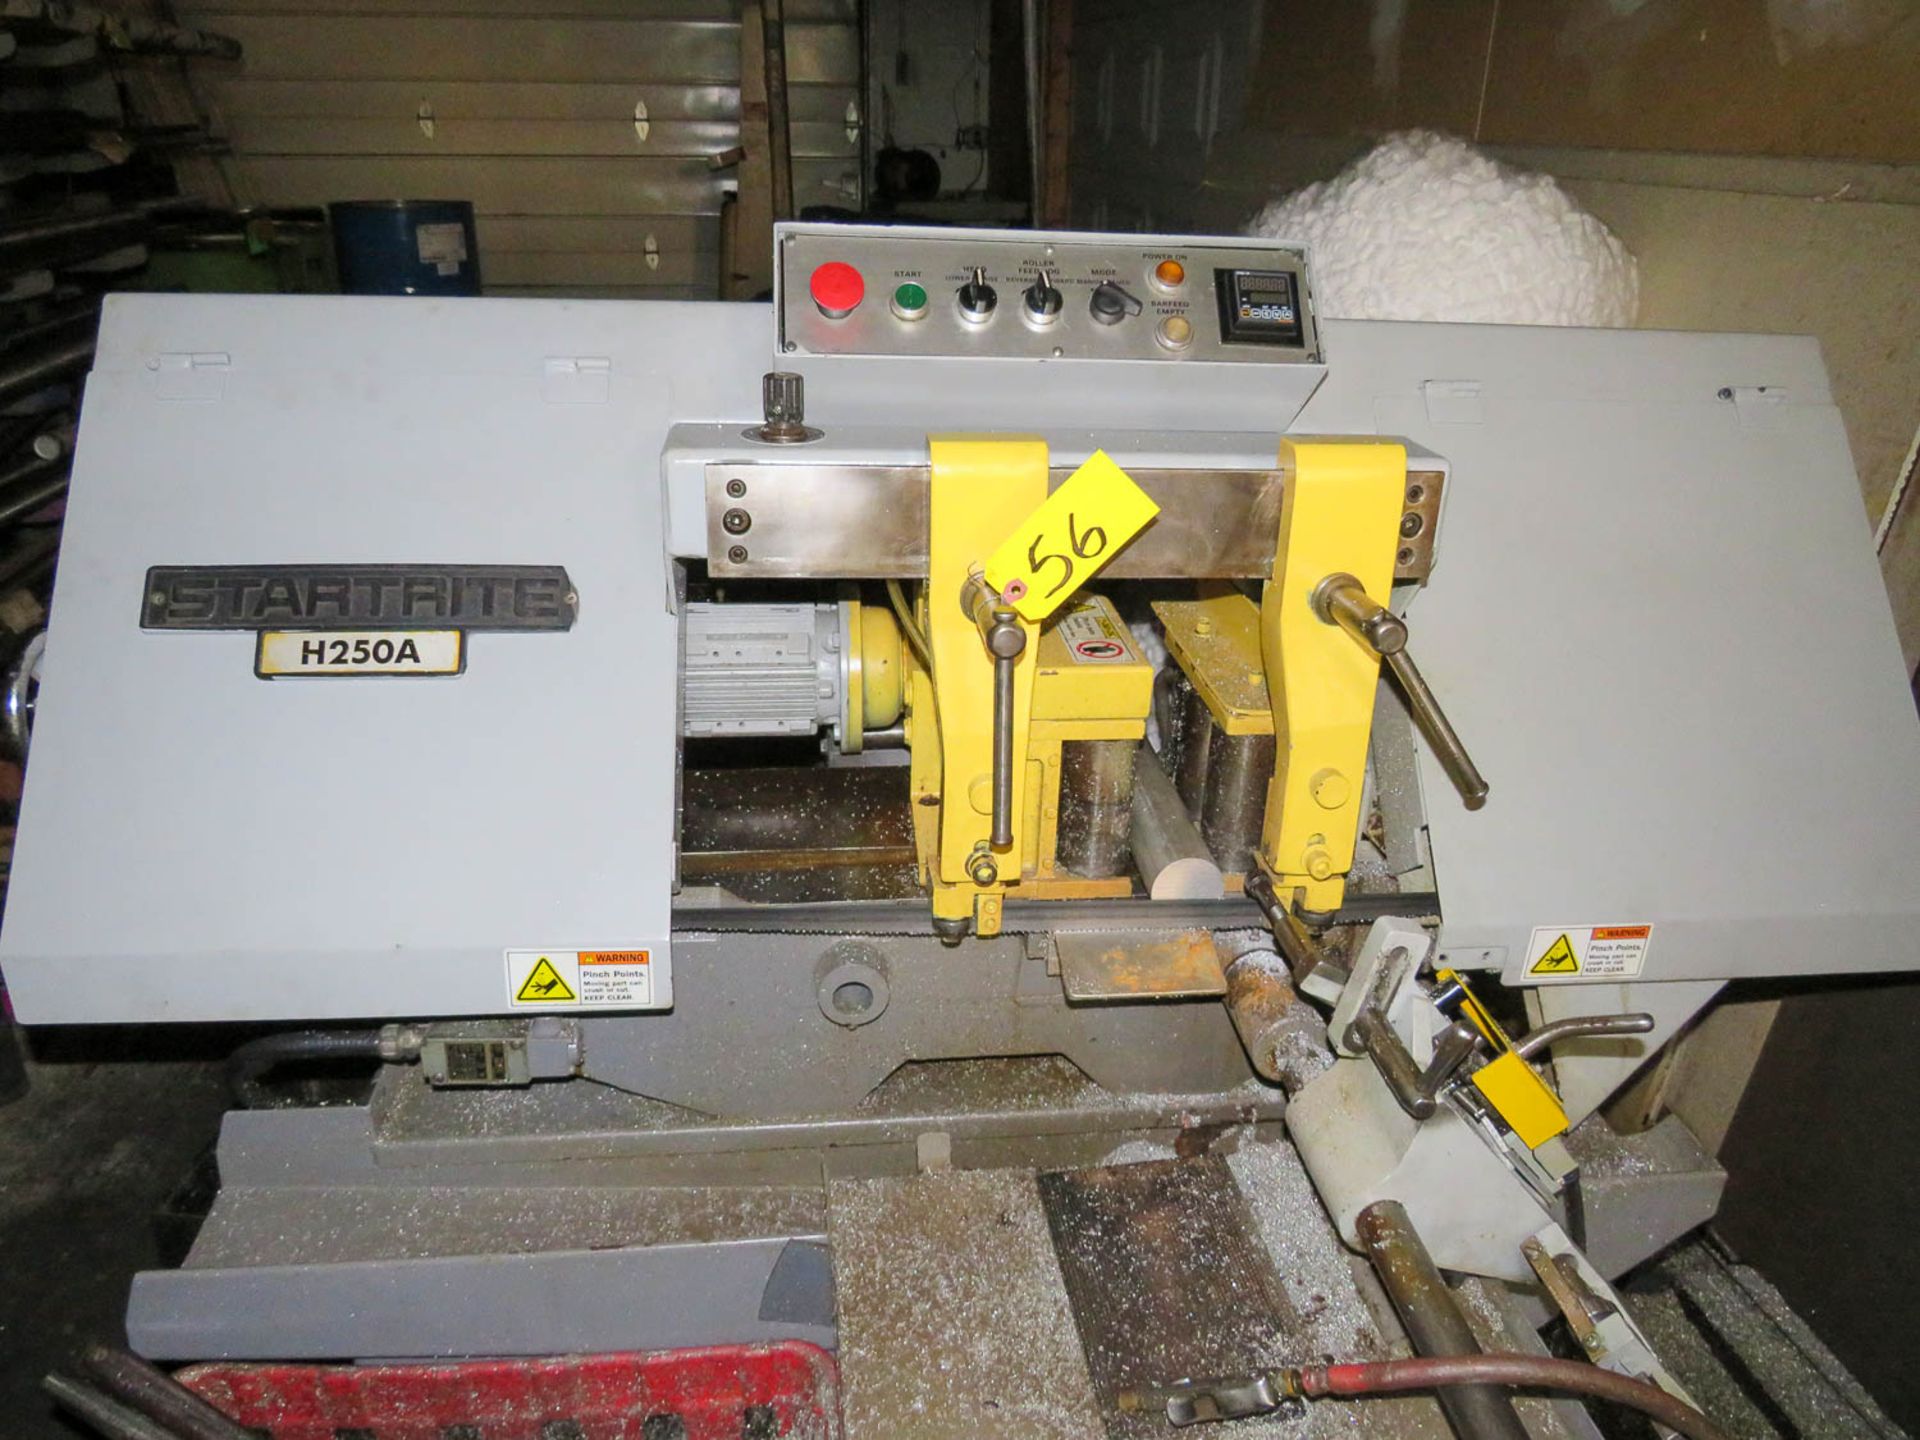 10" X 10" STARTRITE MDL. H250A AUTOMATIC FEED HORIZONTAL BANDSAW, 1" BLADE, AUTONICS PRESET CONTROL, - Image 2 of 4